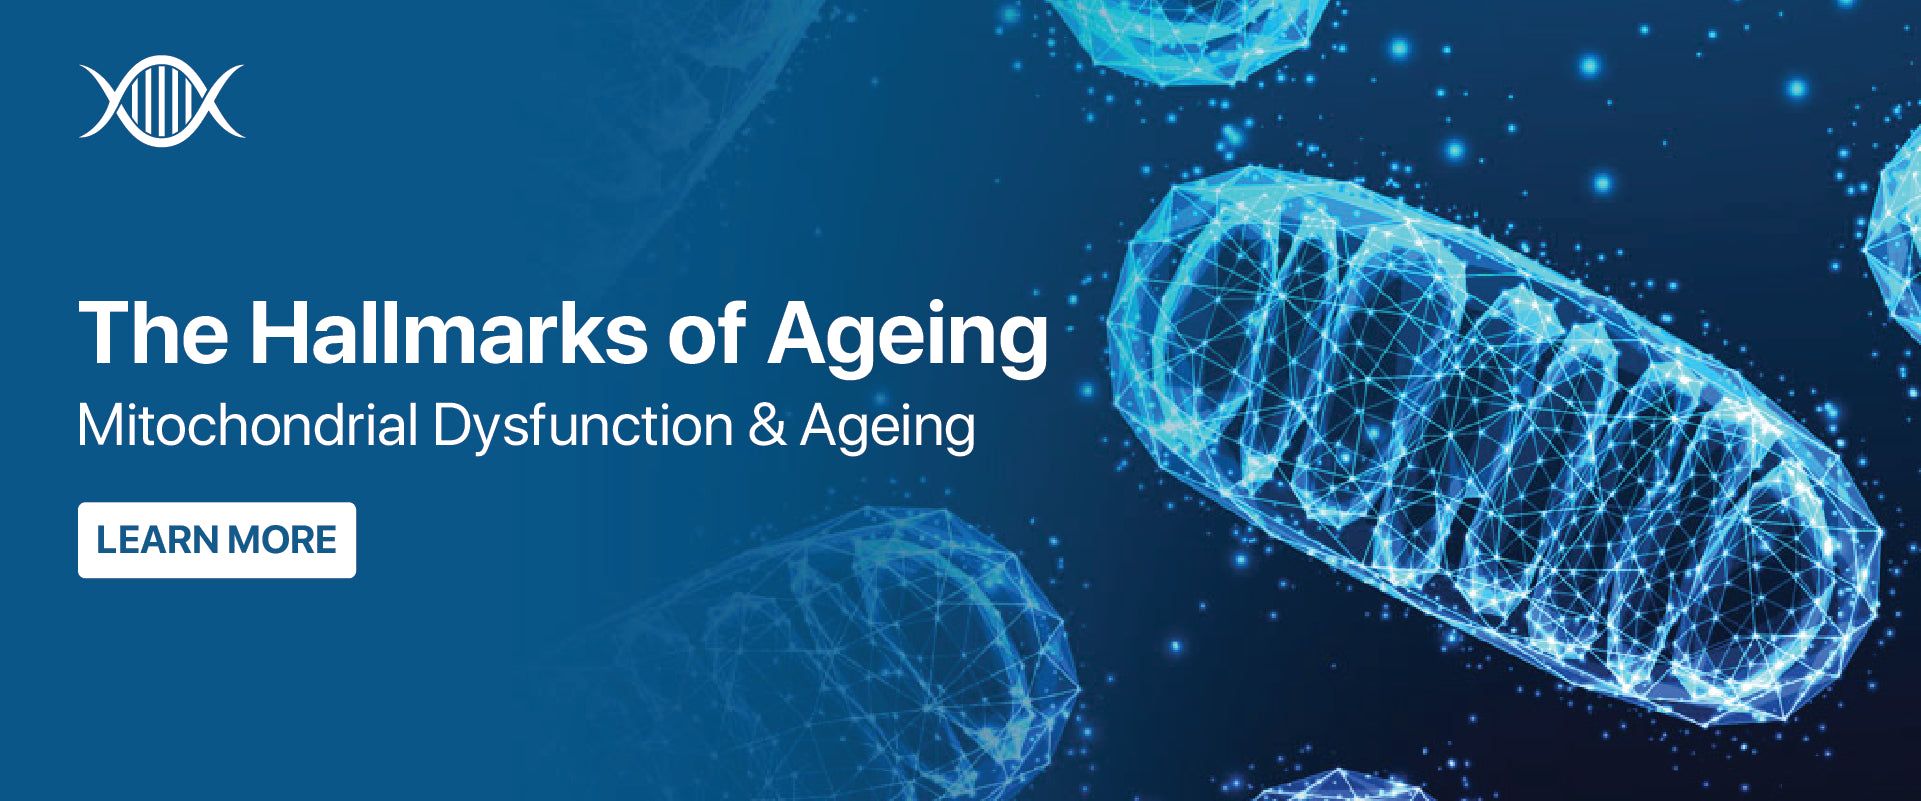 The Hallmarks of Ageing-Mitochondrial Dysfunction & Ageing